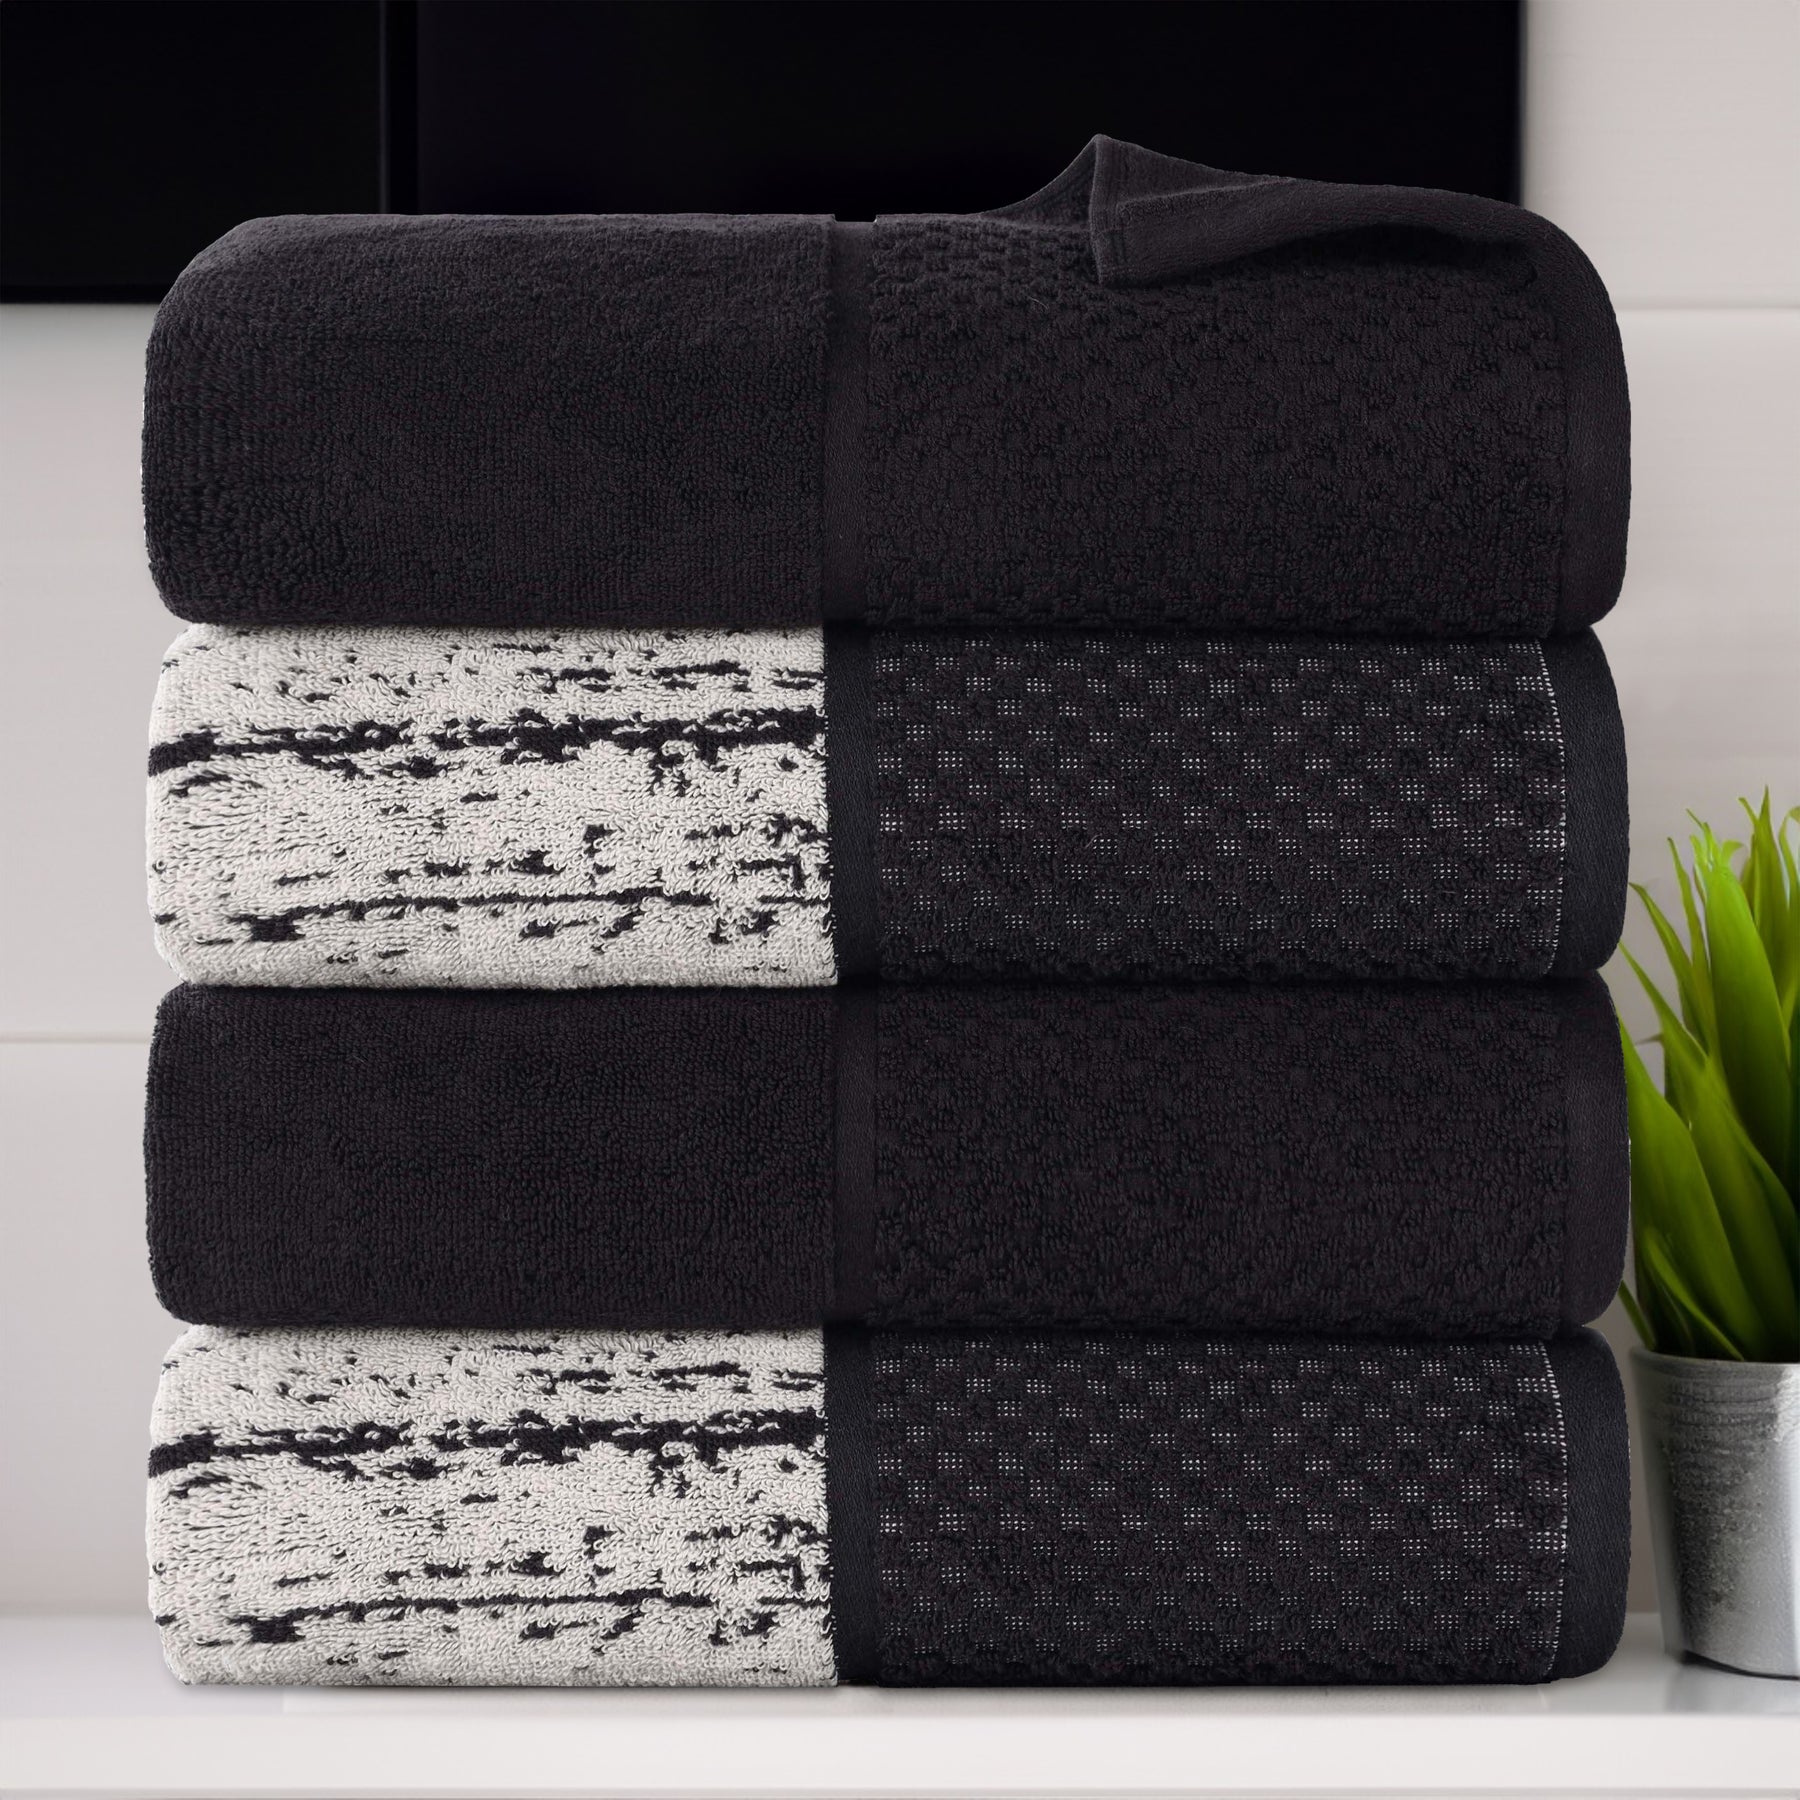 Lodie Cotton Jacquard Solid and Two-Toned Bath Towel Set of 4